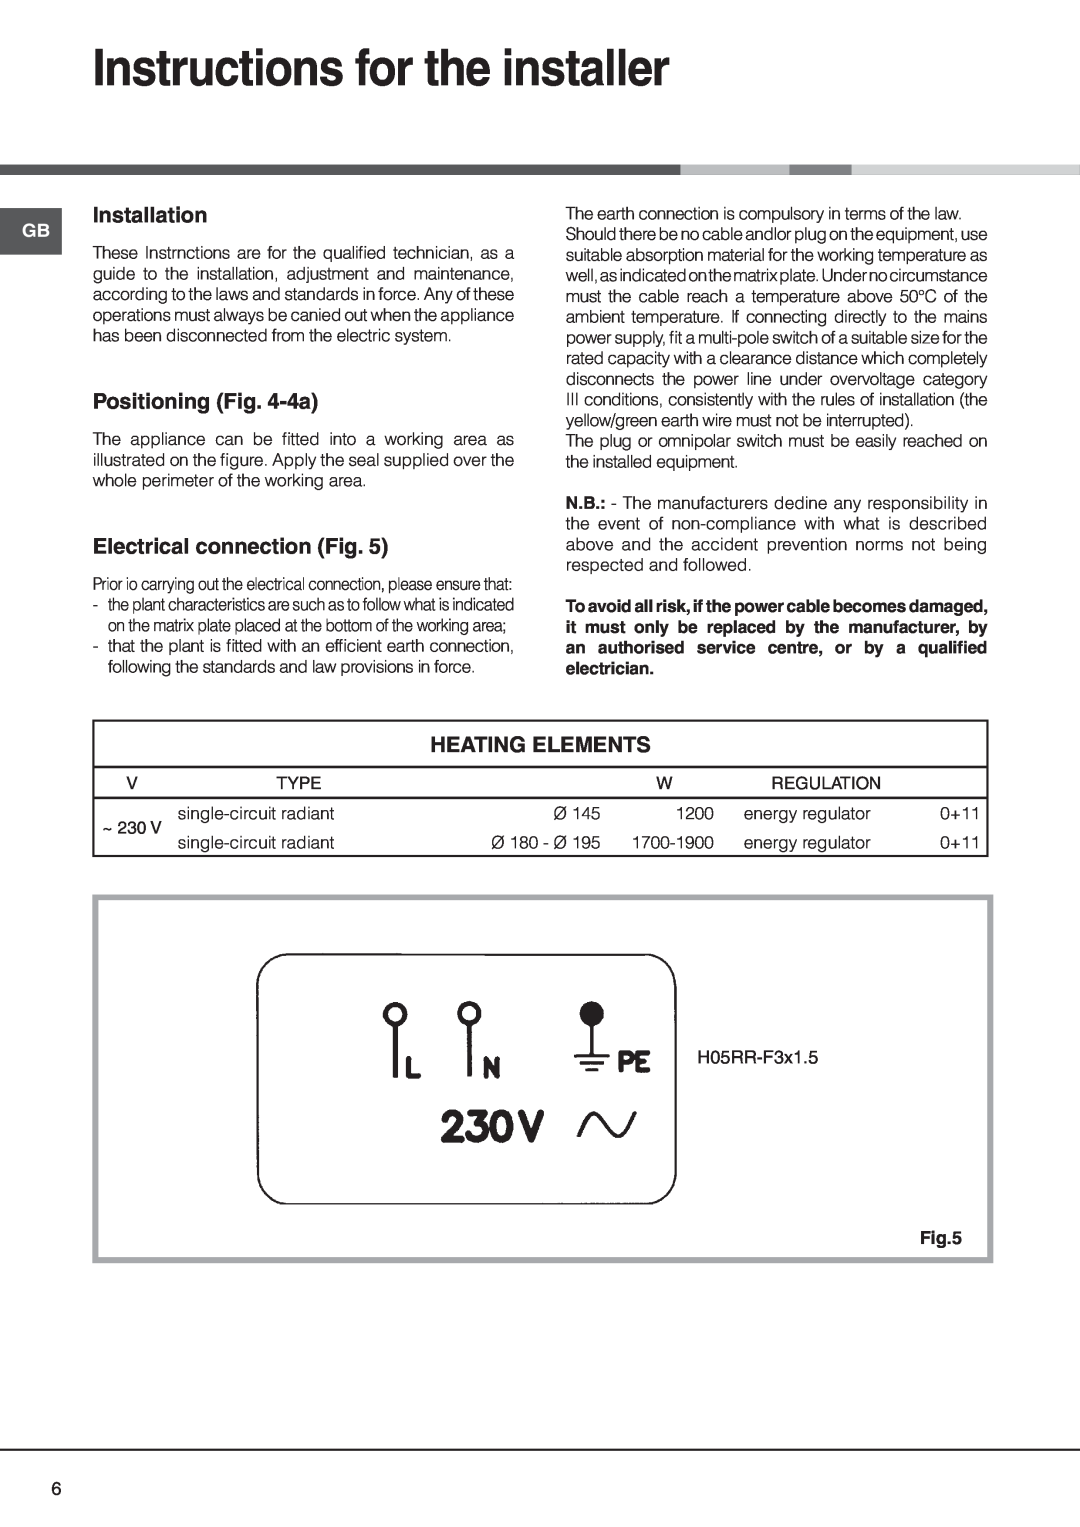 Hotpoint C320IX Instructions for the installer, Positioning -4a, Electrical connection Fig, Heating Elements, Installation 